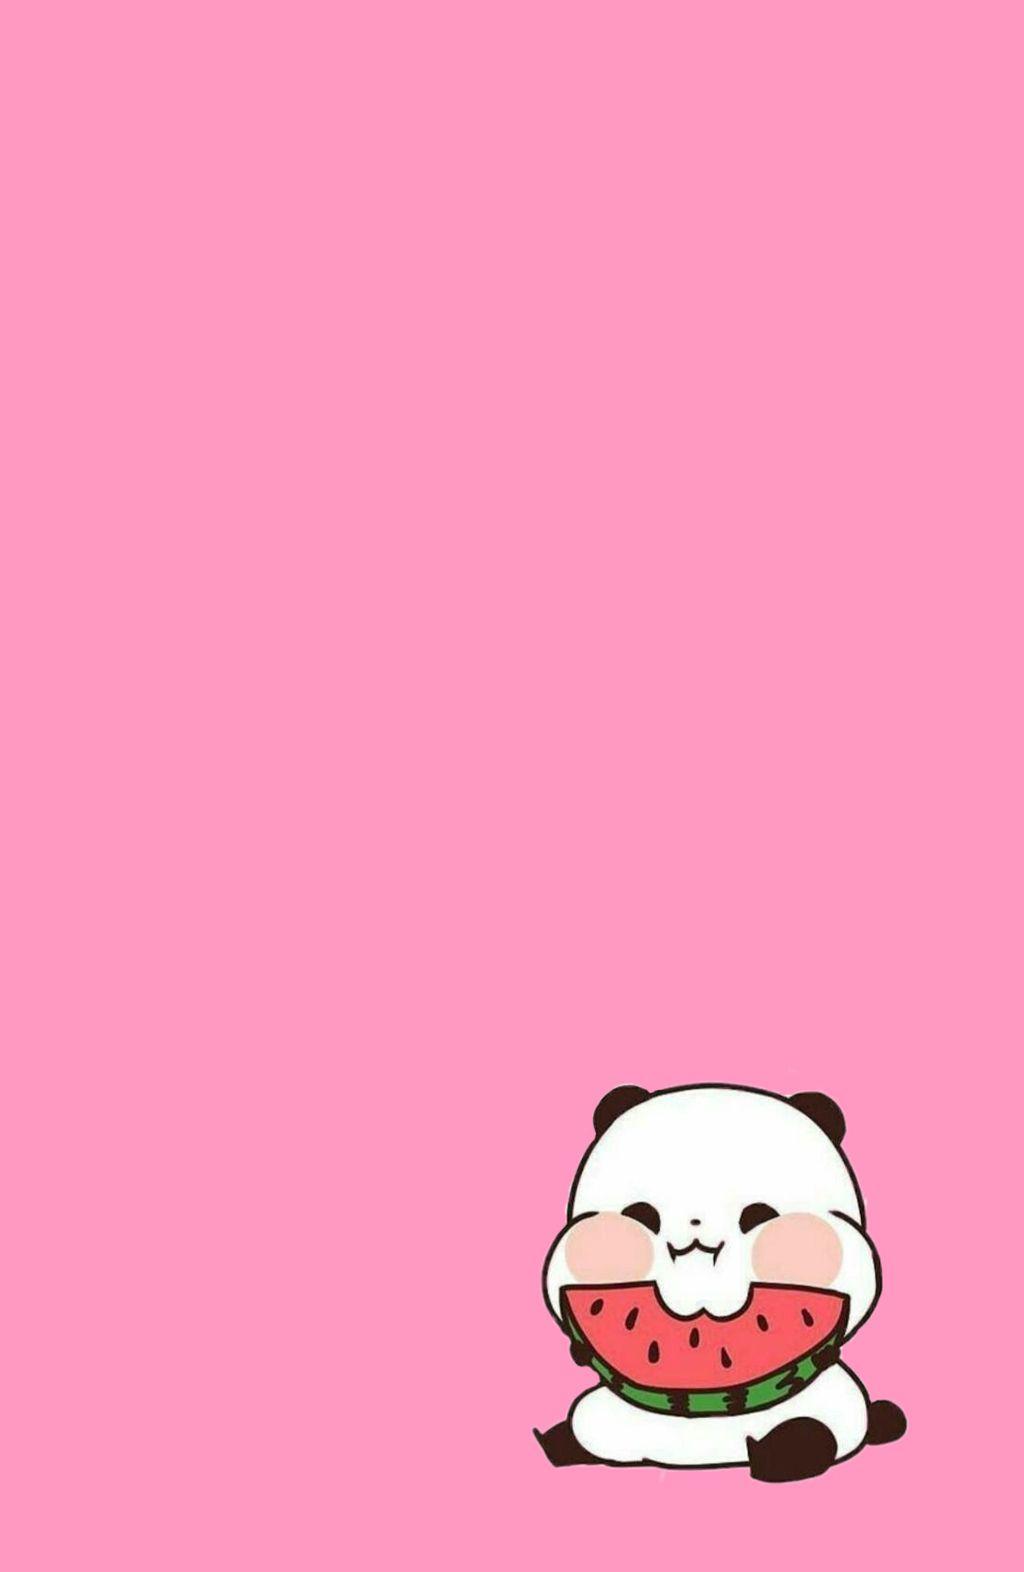 wallpaper heres a cute panda eating a watermelon with